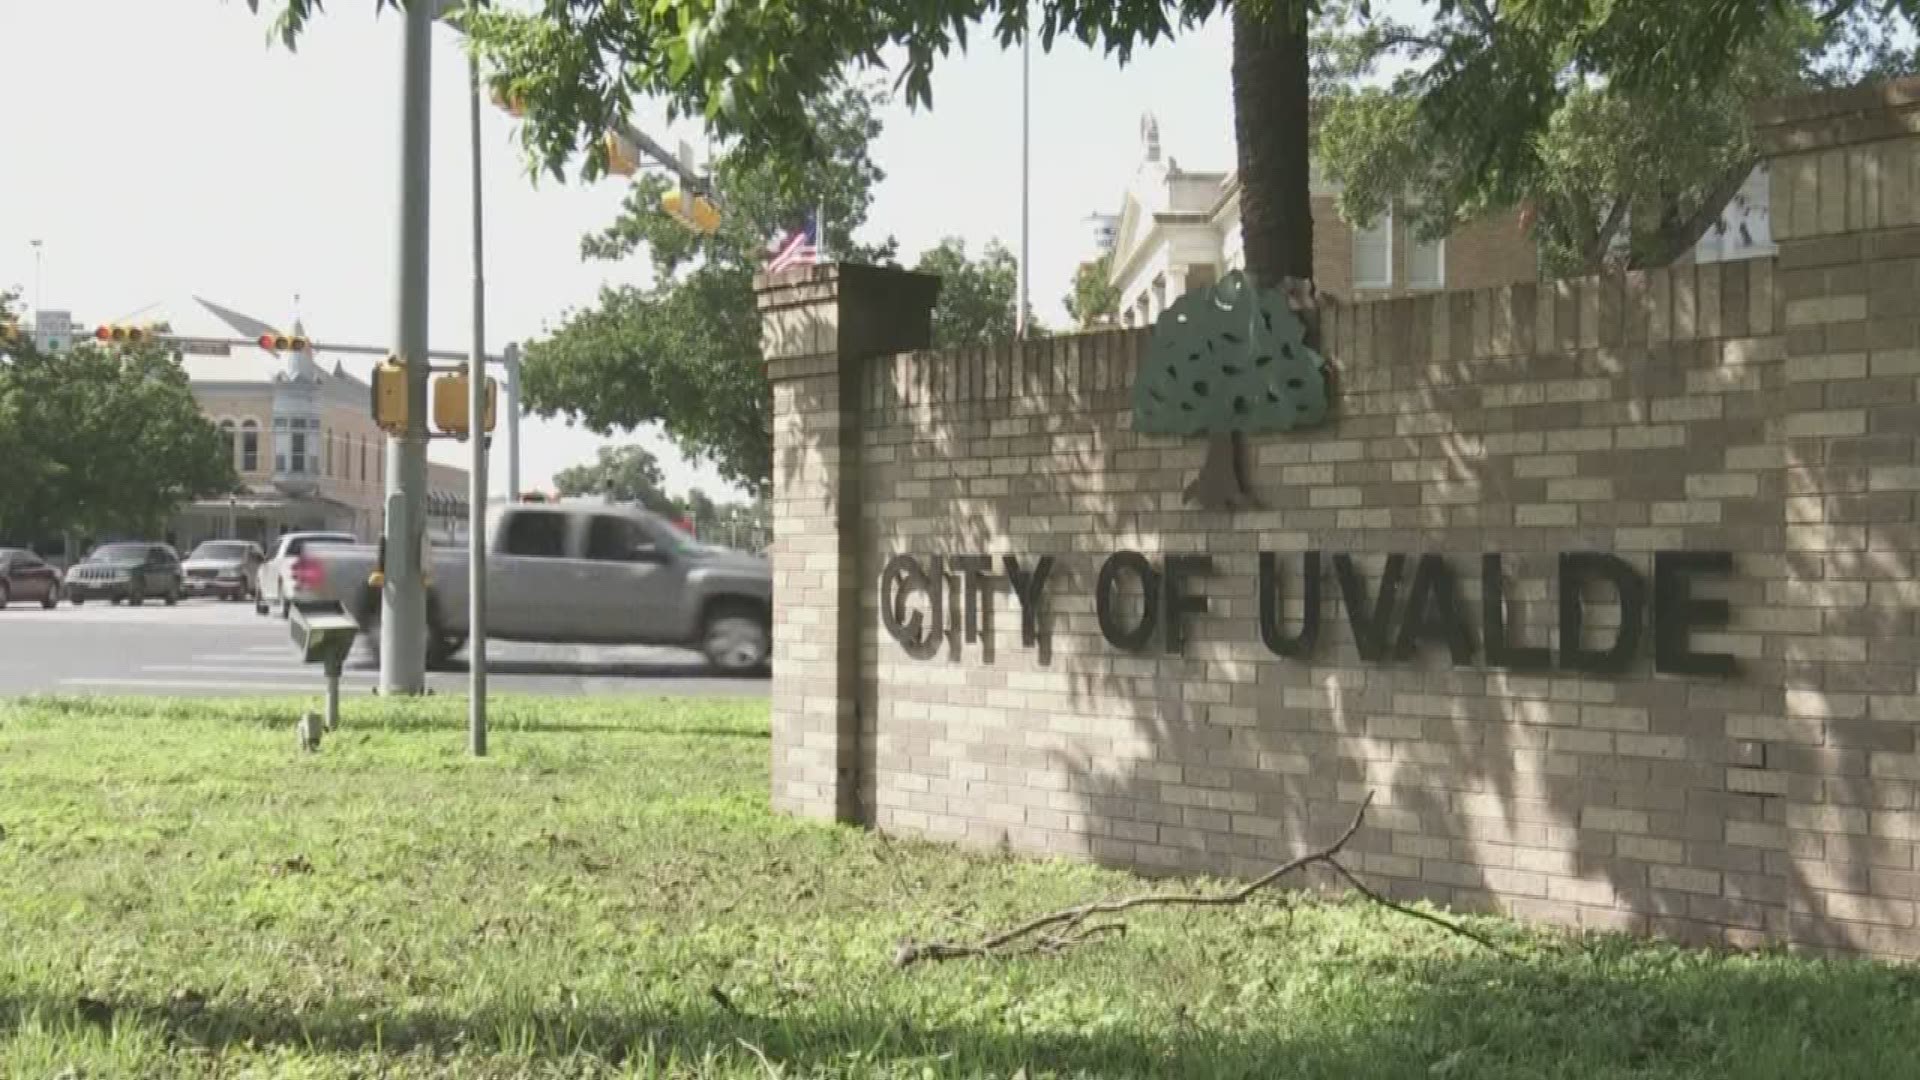 The mayor of Uvalde wants to save more than a hundred local jobs after the Williamson Dickies Company announced plans to close the Uvalde plant. Eyewitness News reporter Roxie Bustamante has more.